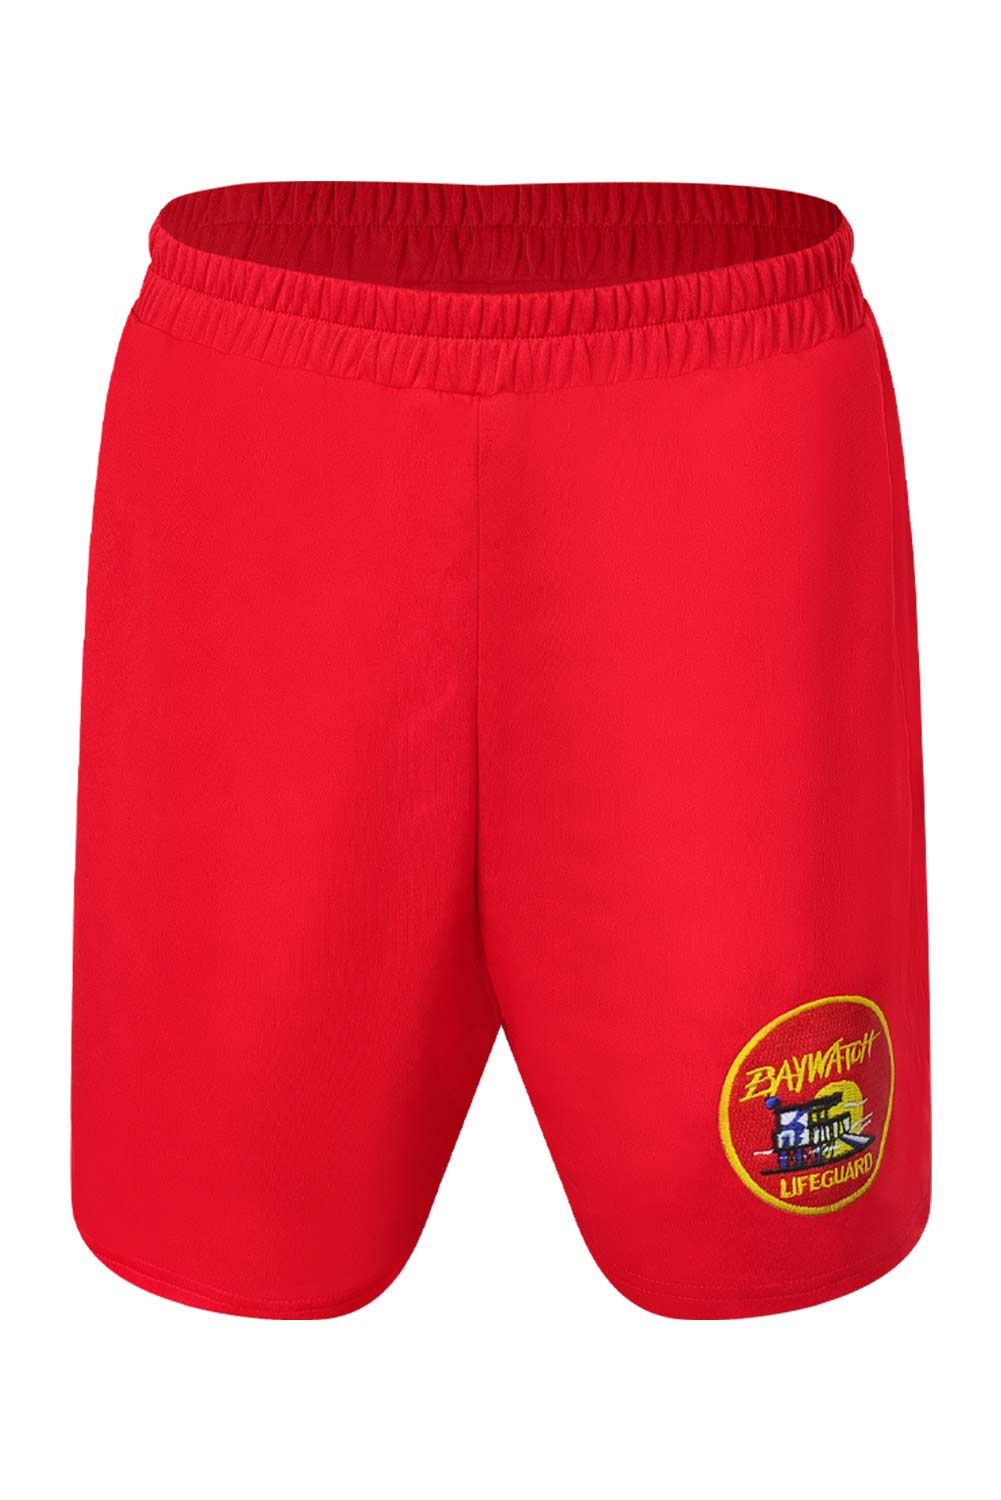 TV Baywatch C.J. Parker Red Shorts Pants Outfits Halloween Carnival Suit Cosplay Costume